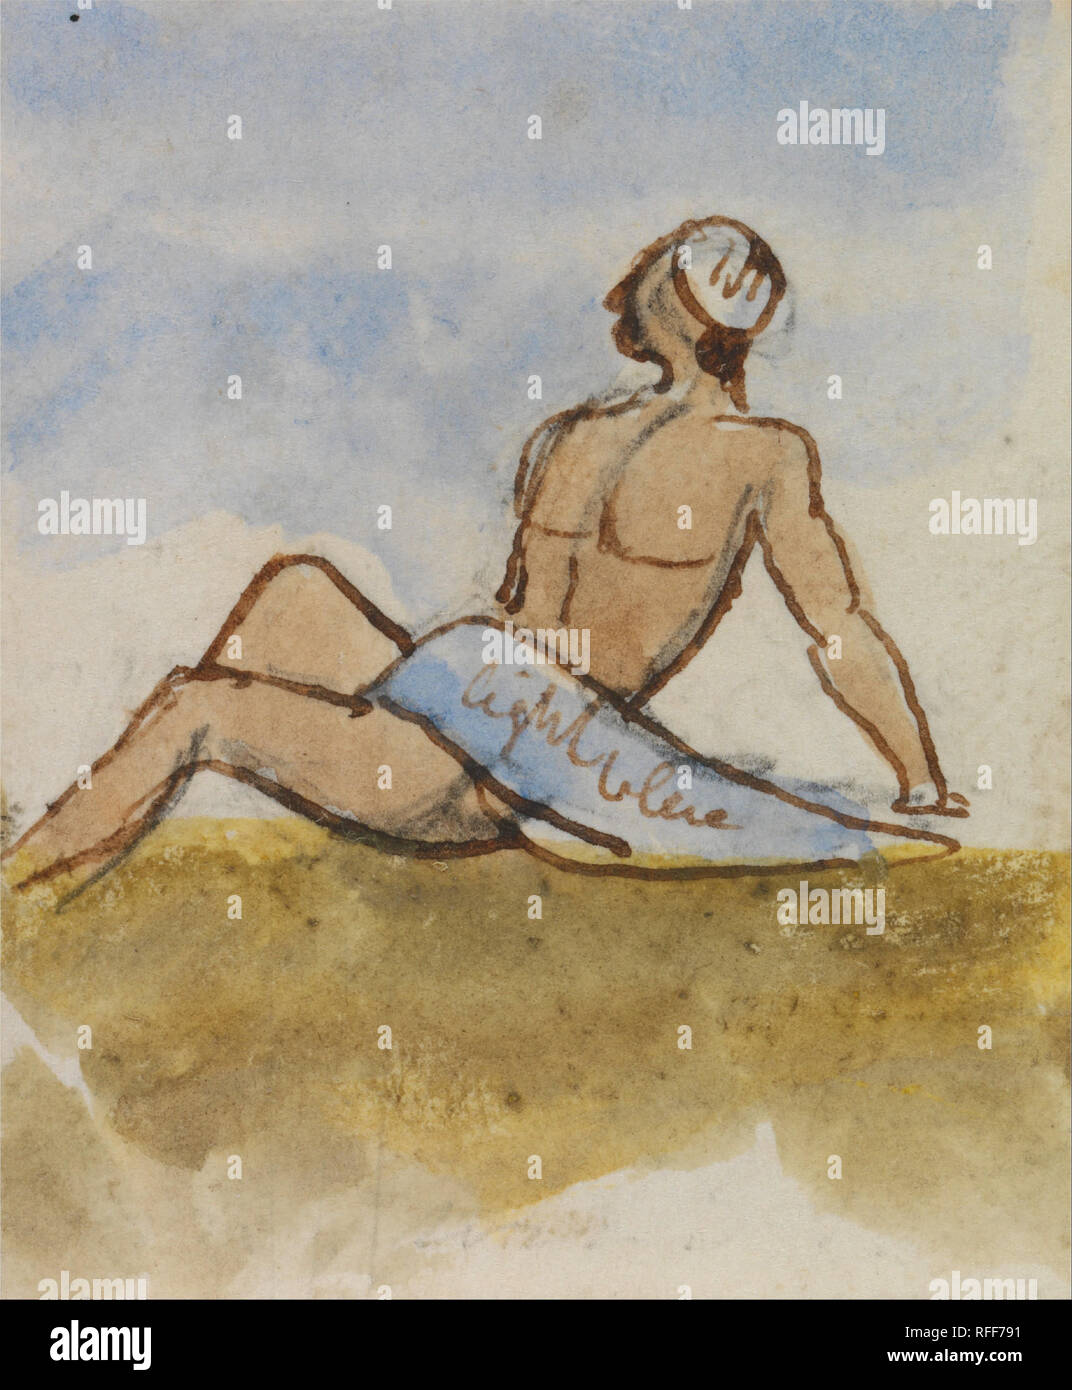 Egyptian Man. Date/Period: January to April 1867. Drawing. Watercolor with pen in brown ink over graphite on medium, slightly textured, cream wove paper. Height: 43 mm (1.69 in); Width: 35 mm (1.37 in). Author: Edward Lear. Stock Photo